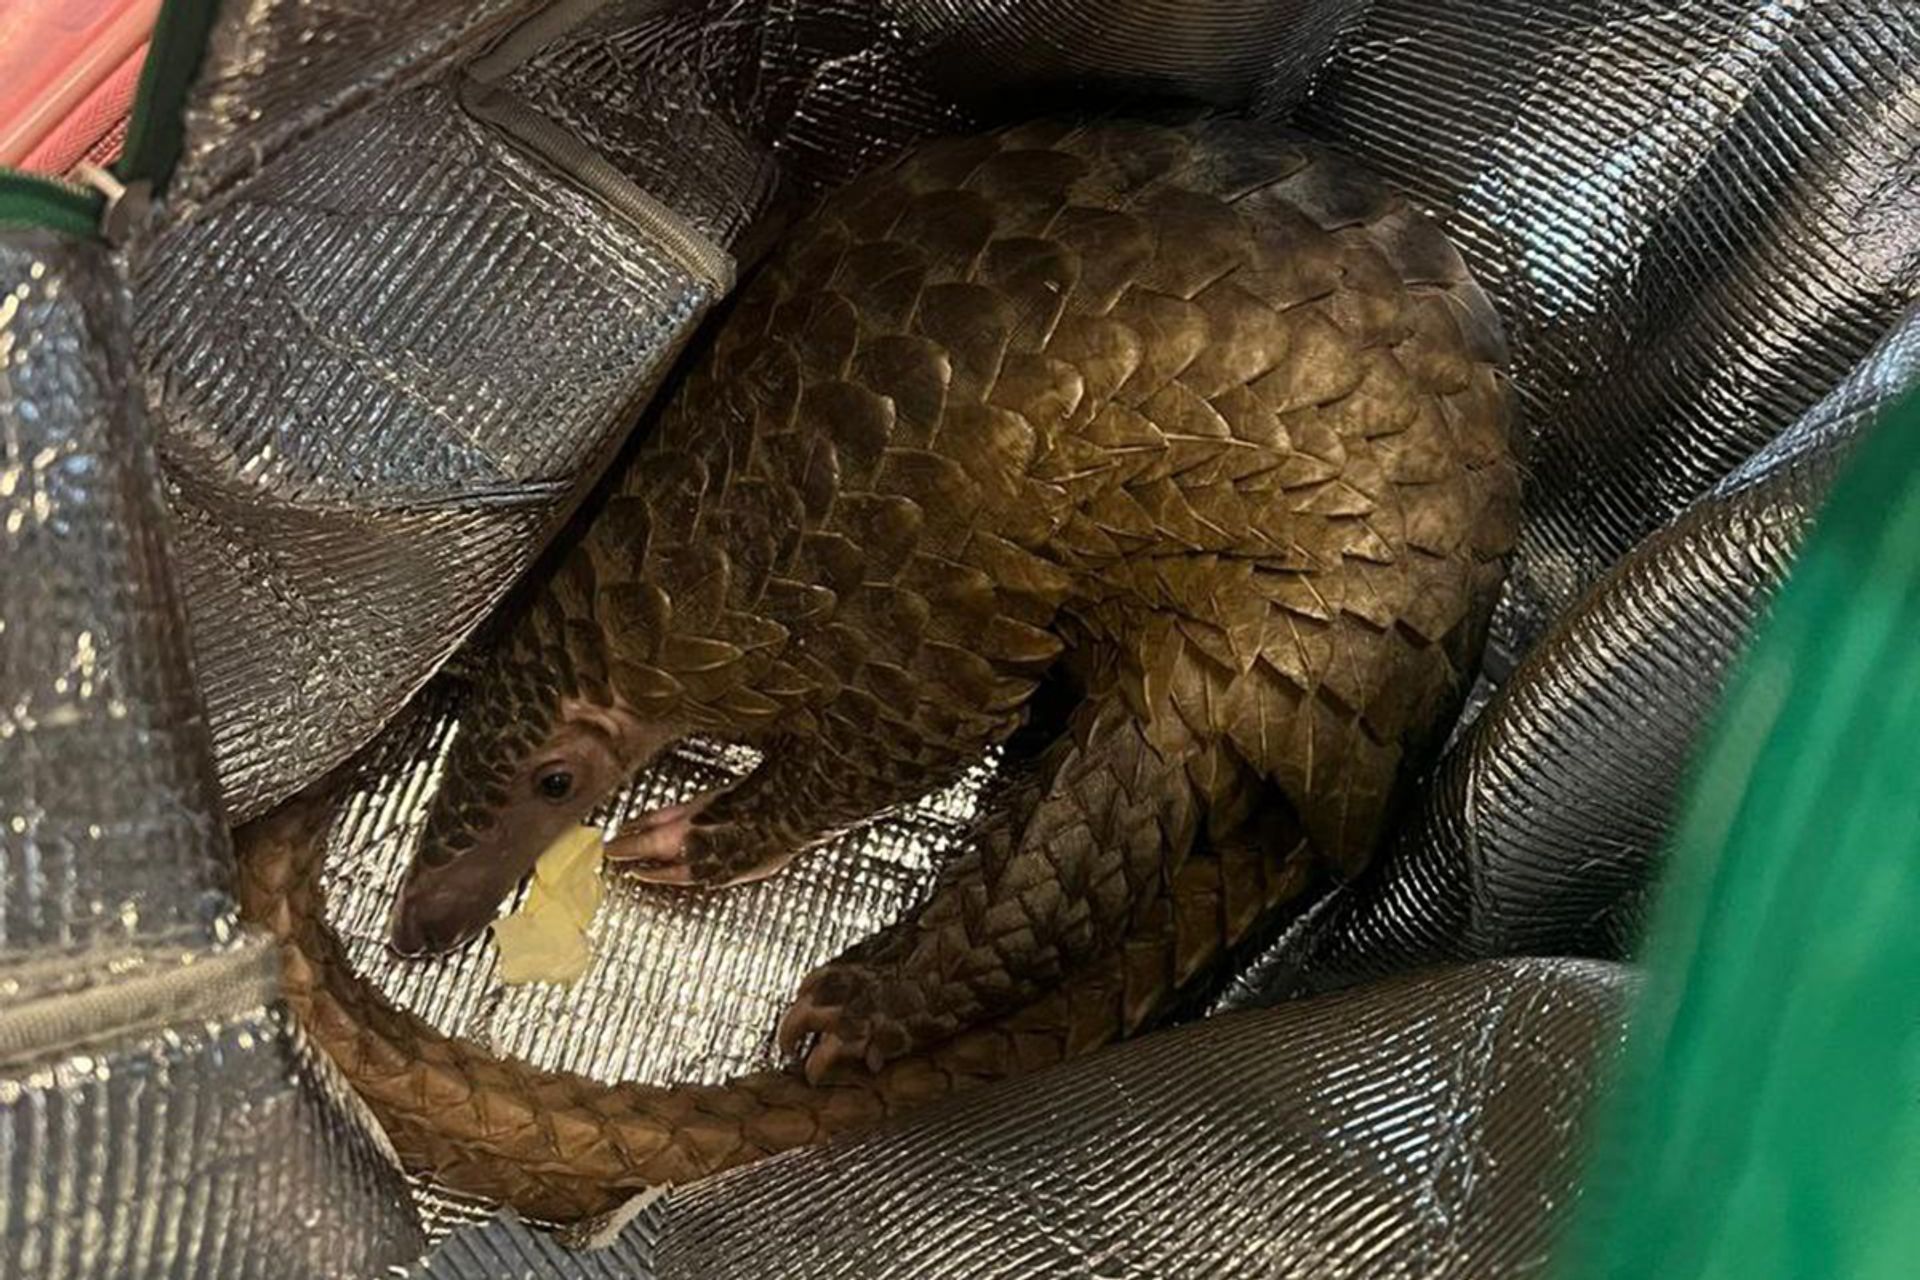 The Sunda pangolin was stored in a Grabfood bag used for deliveries and had been smuggled from Malaysia. PHOTO: SCREENGRAB FROM TELEGRAM